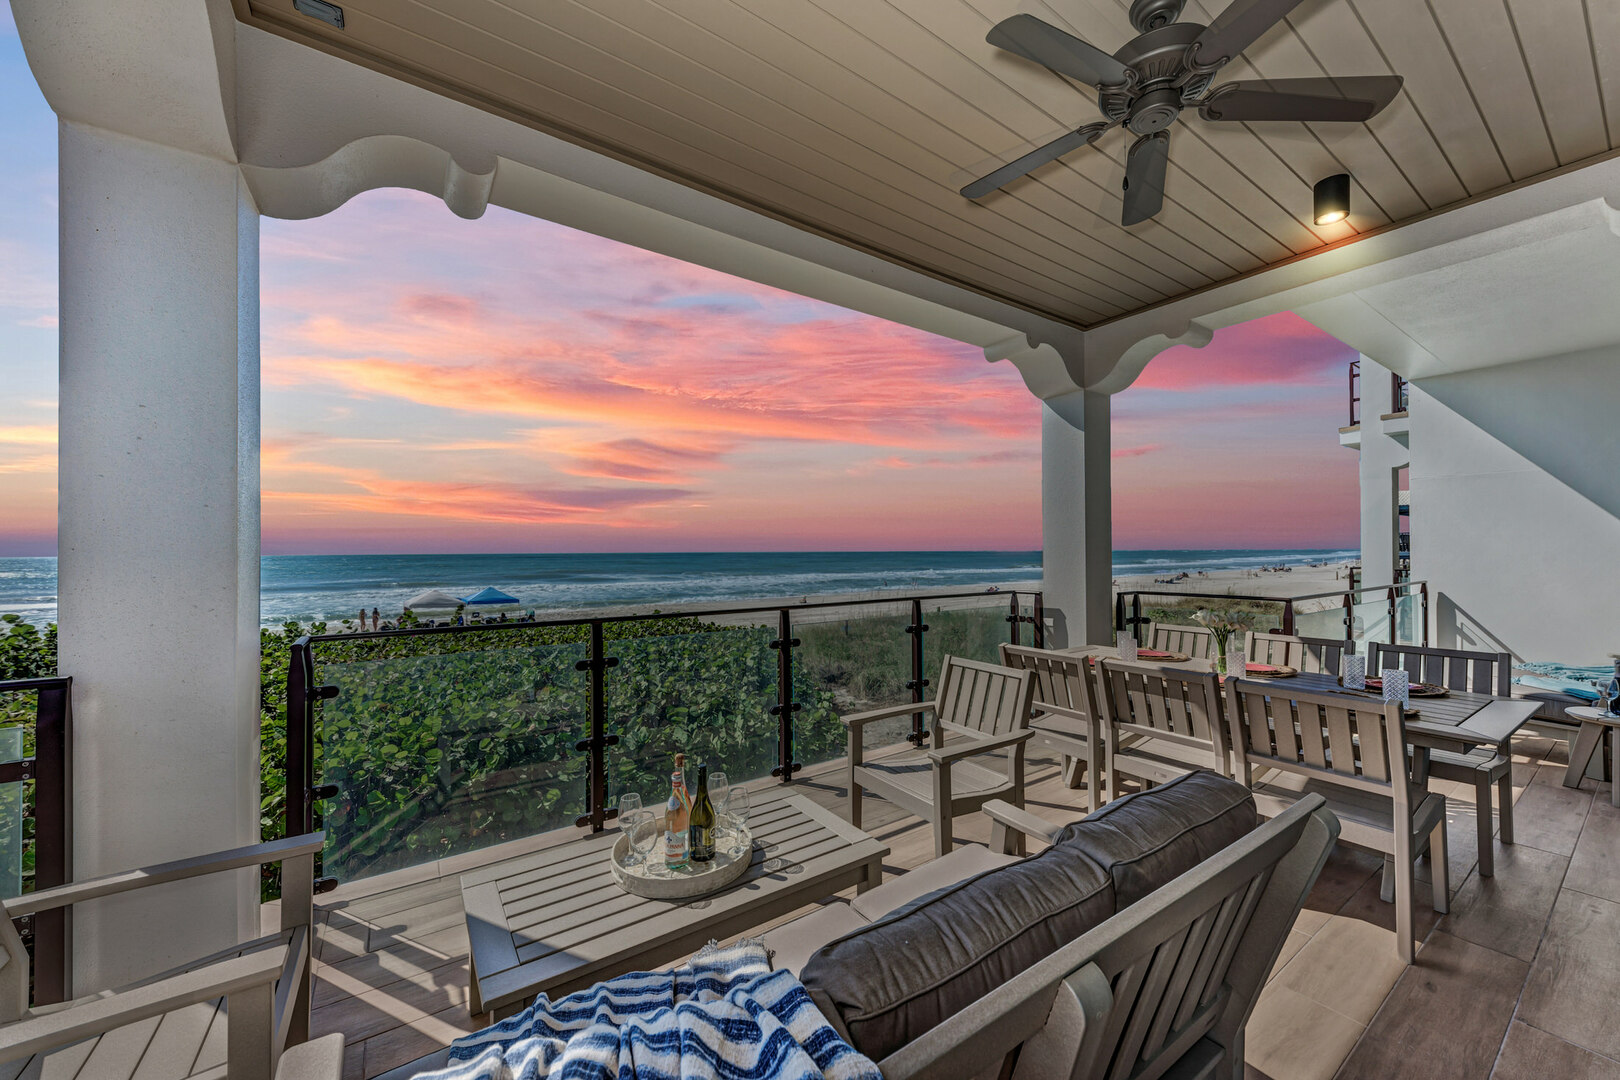 From our beautiful Anna Maria island vacation rentals, view of the Gulf of Mexico at sunset from Buena Vista #2 by Anna Maria Life Vacation Rentals